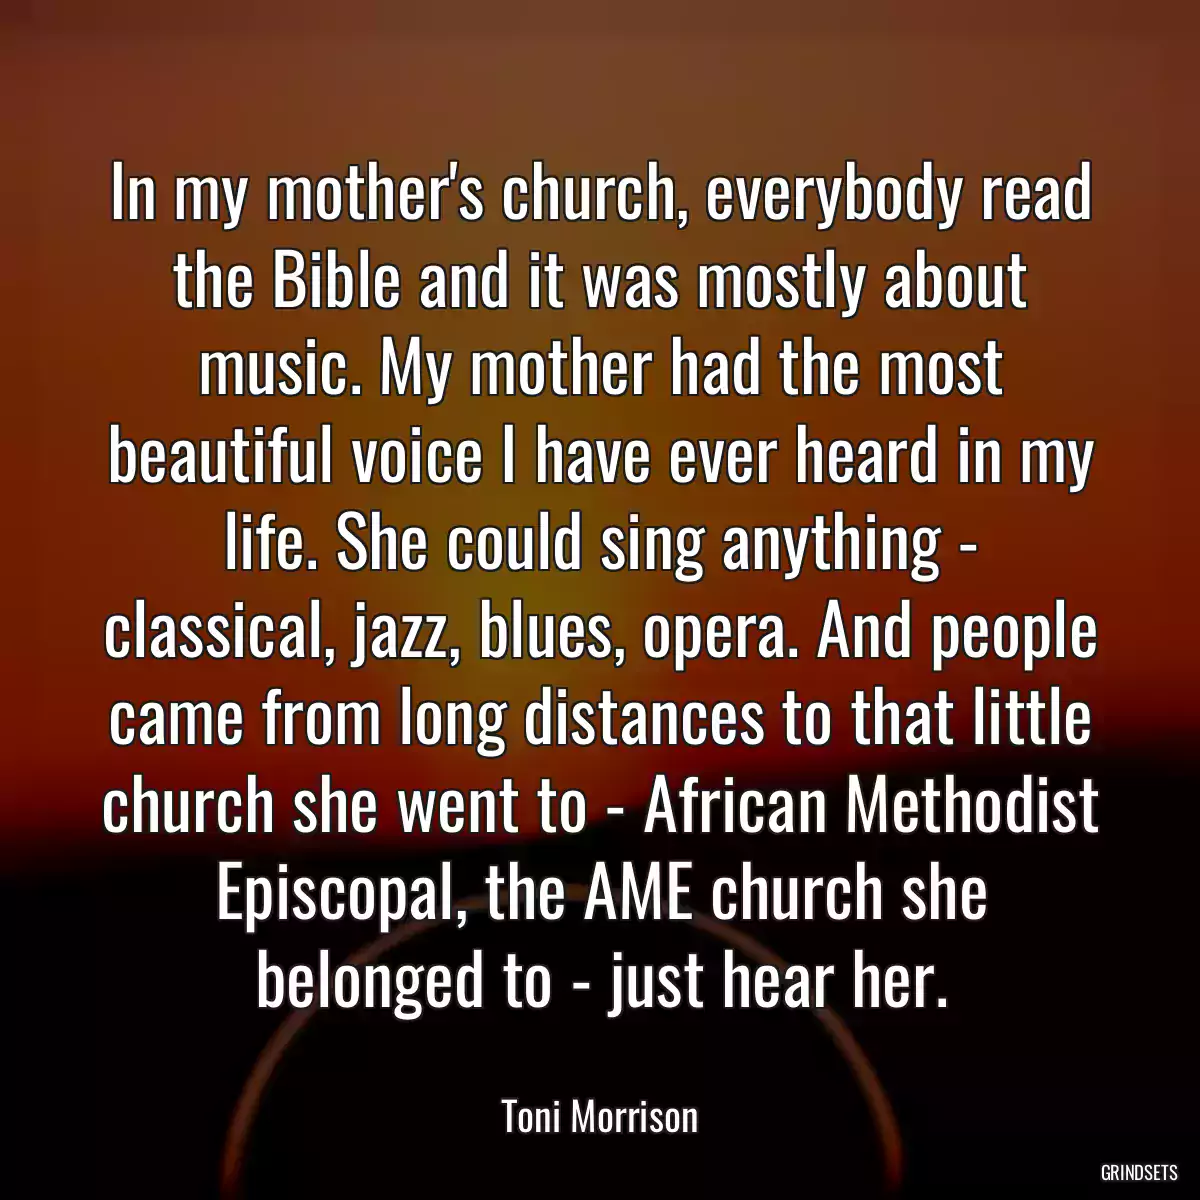 In my mother\'s church, everybody read the Bible and it was mostly about music. My mother had the most beautiful voice I have ever heard in my life. She could sing anything - classical, jazz, blues, opera. And people came from long distances to that little church she went to - African Methodist Episcopal, the AME church she belonged to - just hear her.